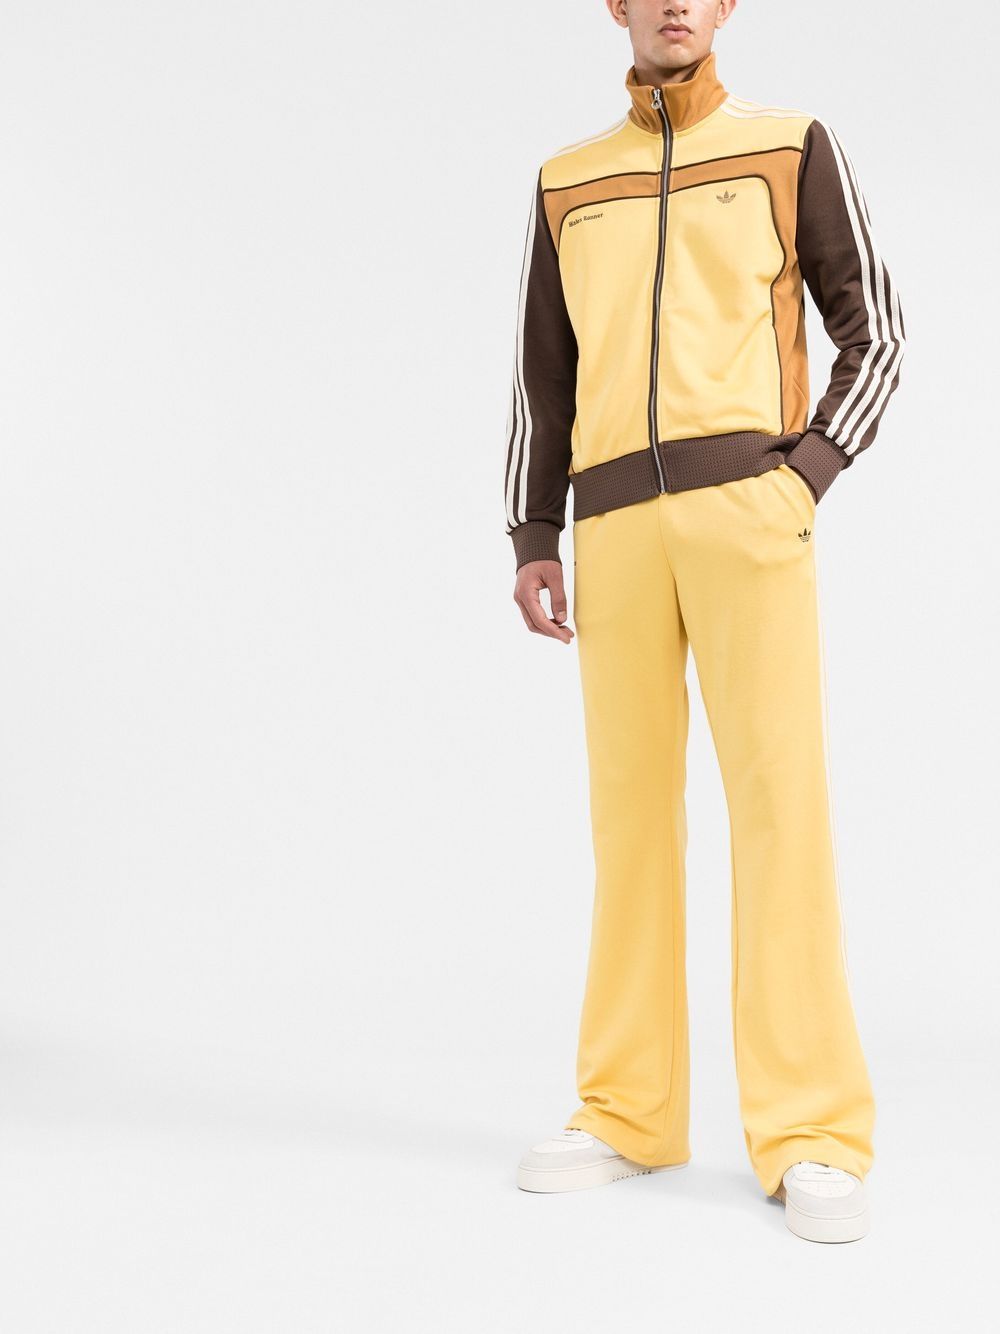 citron yellow/white recycled polyester trousers